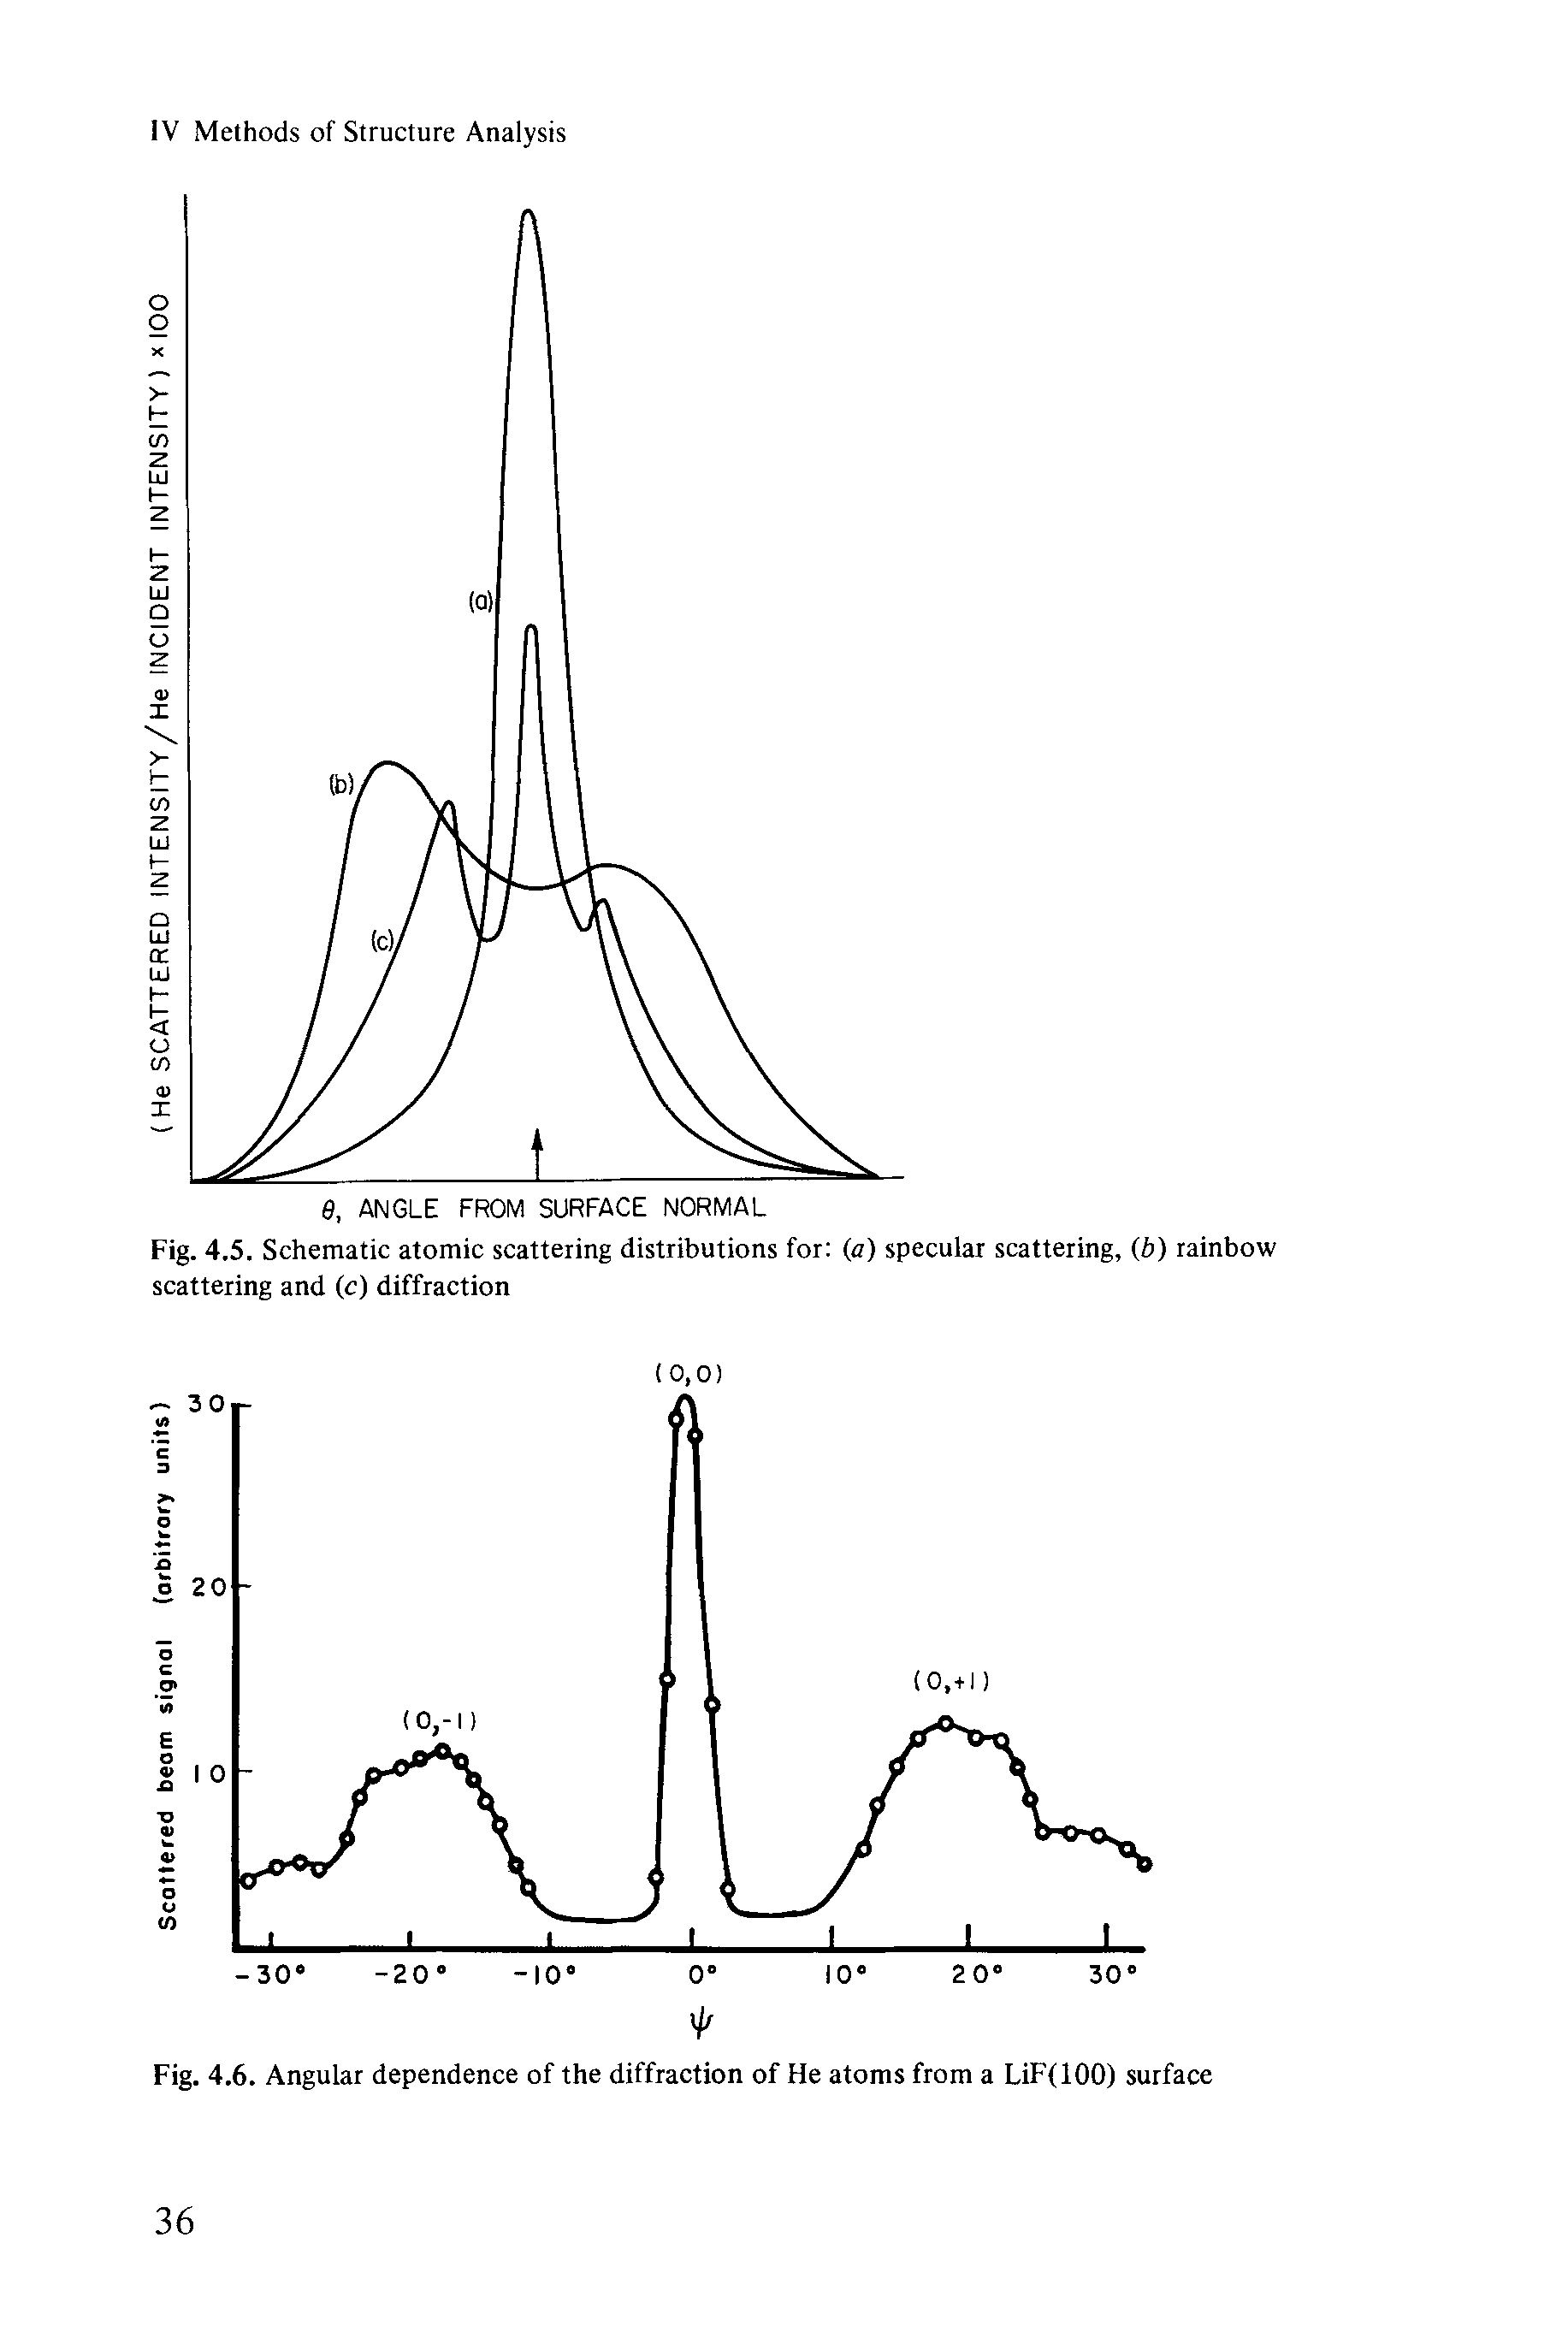 Fig. 4.5. Schematic atomic scattering distributions for (a) specular scattering, (b) rainbow scattering and (c) diffraction...